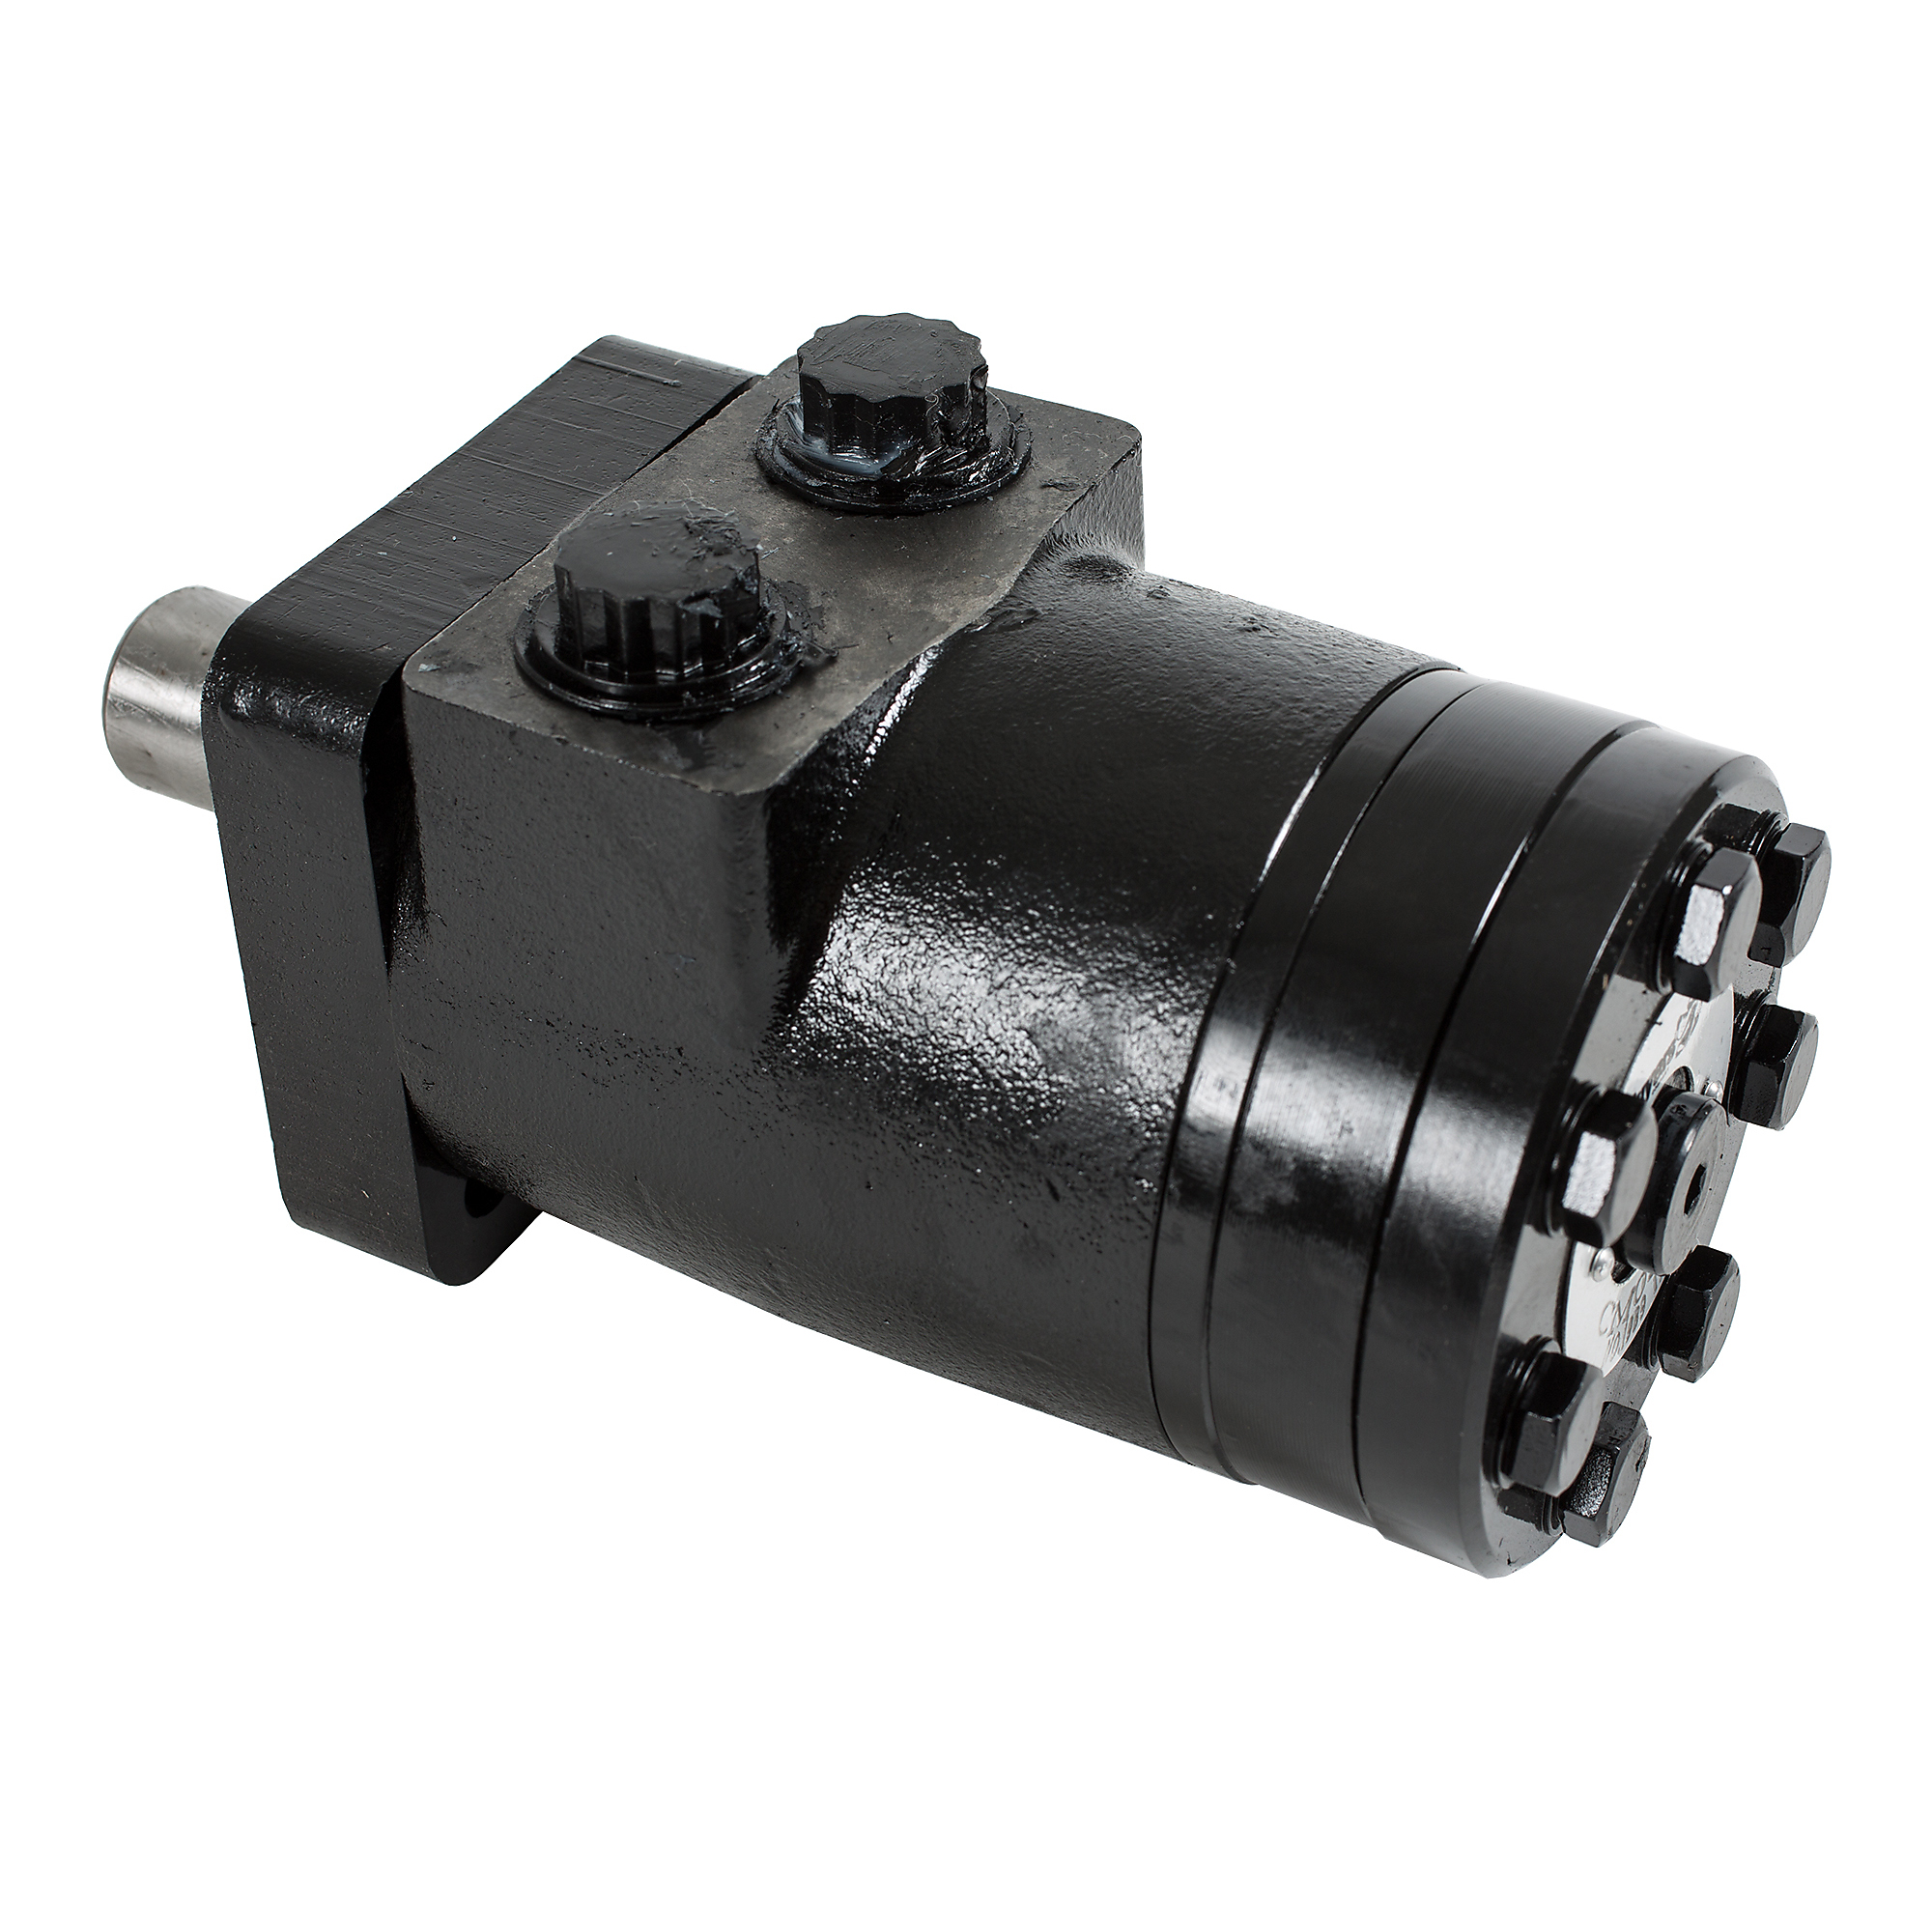 Buyers Products, Replacement 17.9 CIR Hydraulic Auger Motor, Included (qty.) 1 Model CM034P